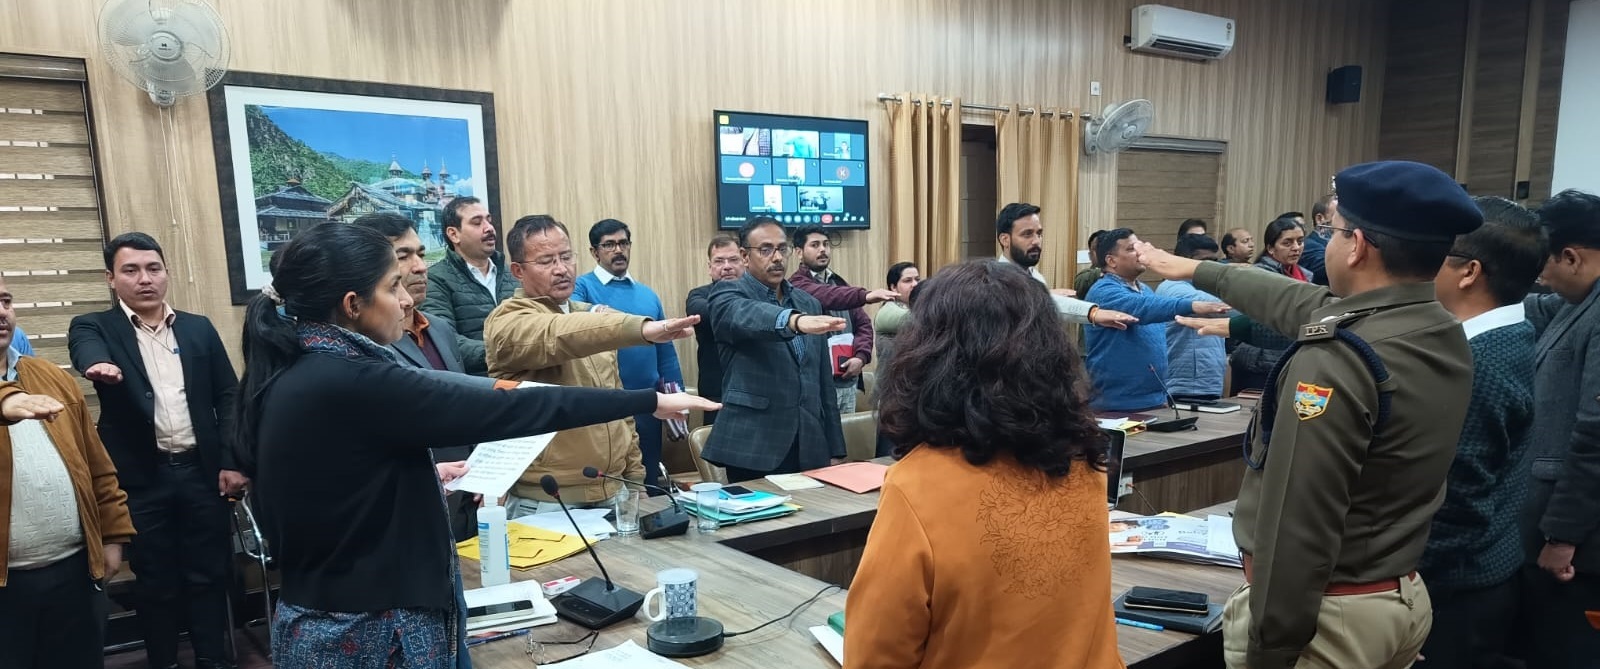 DM administered voter oath to officials